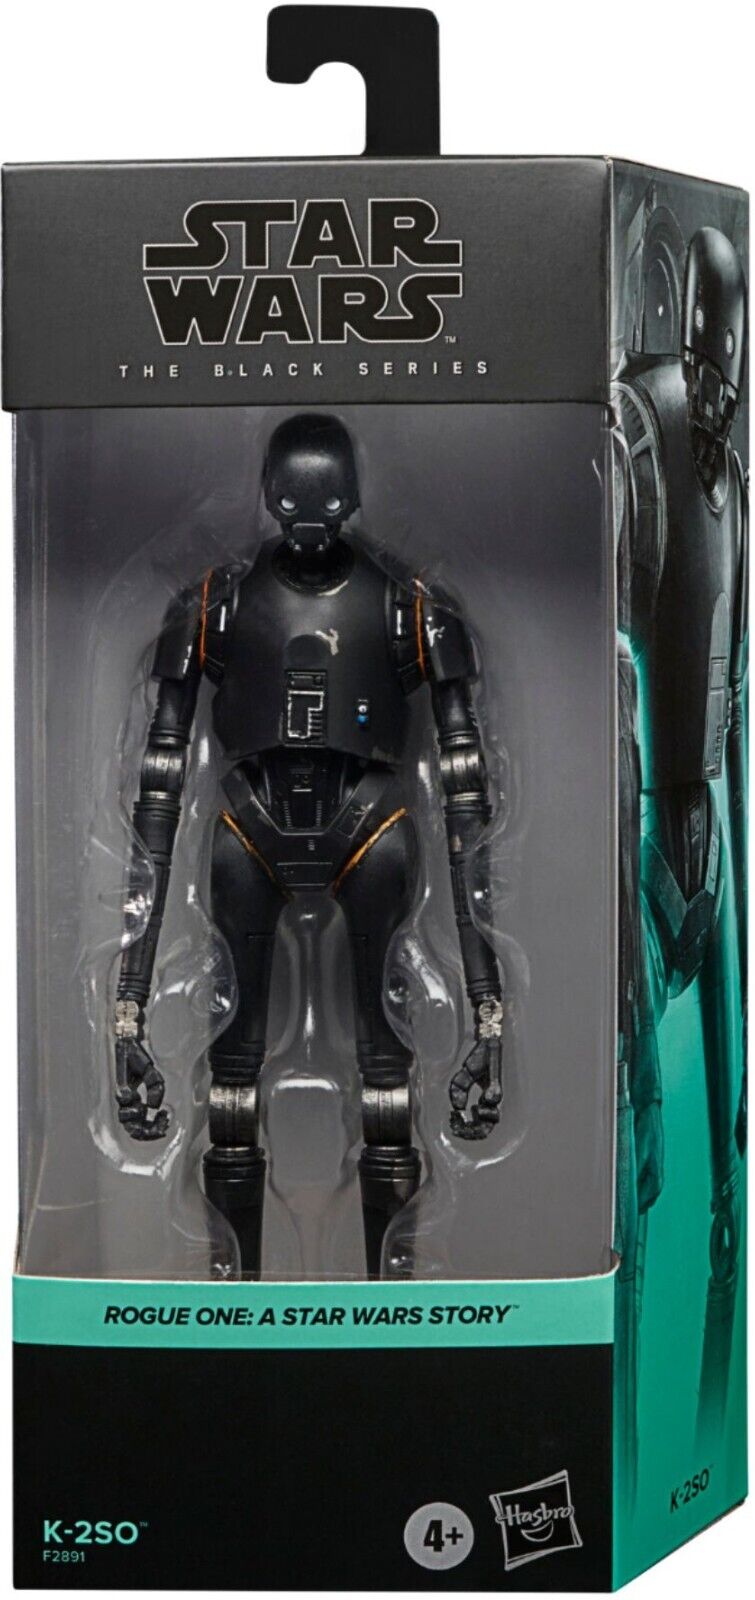 Star Wars The Black Series K-2SO Rogue One 6 Inch